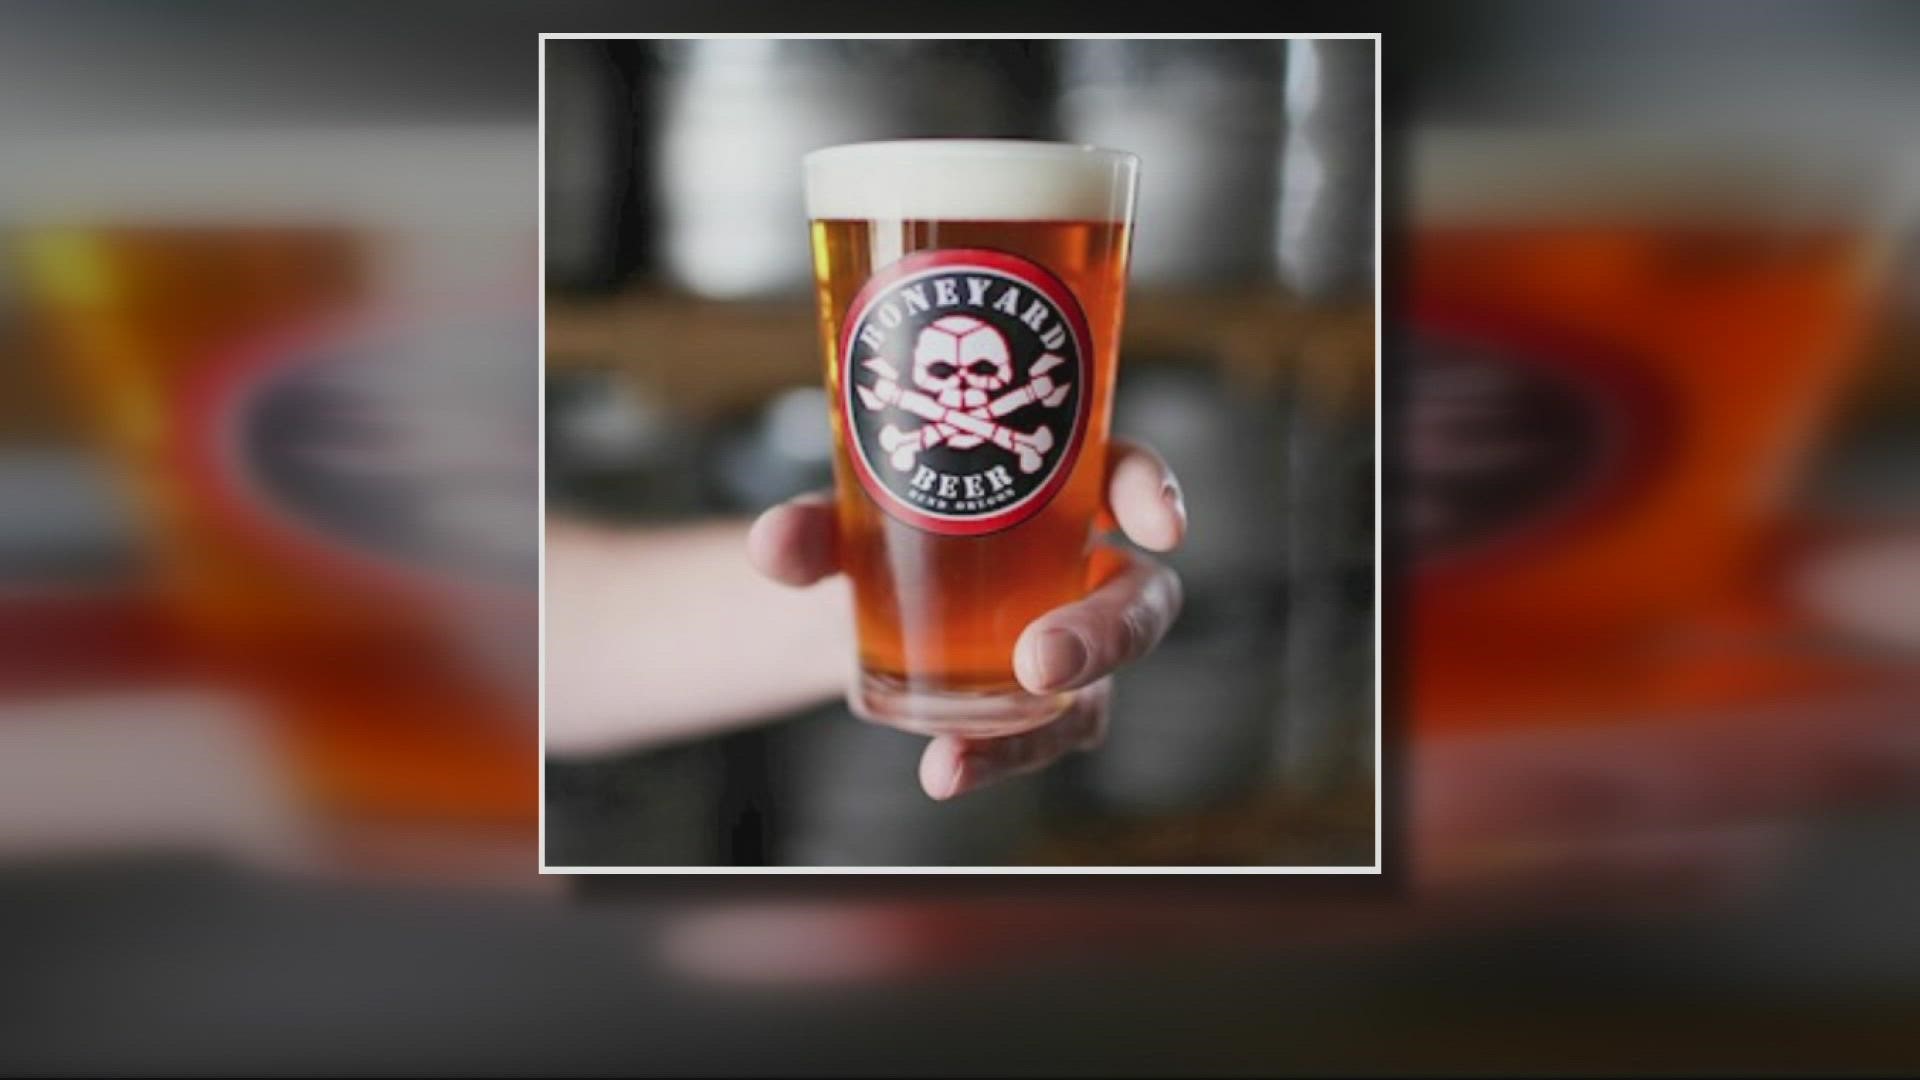 Boneyard Beer overcame Breakside in the finals to capture the Showdown's 2021 crown. KGW photojournalist Steven Redlin spoke with the champions.